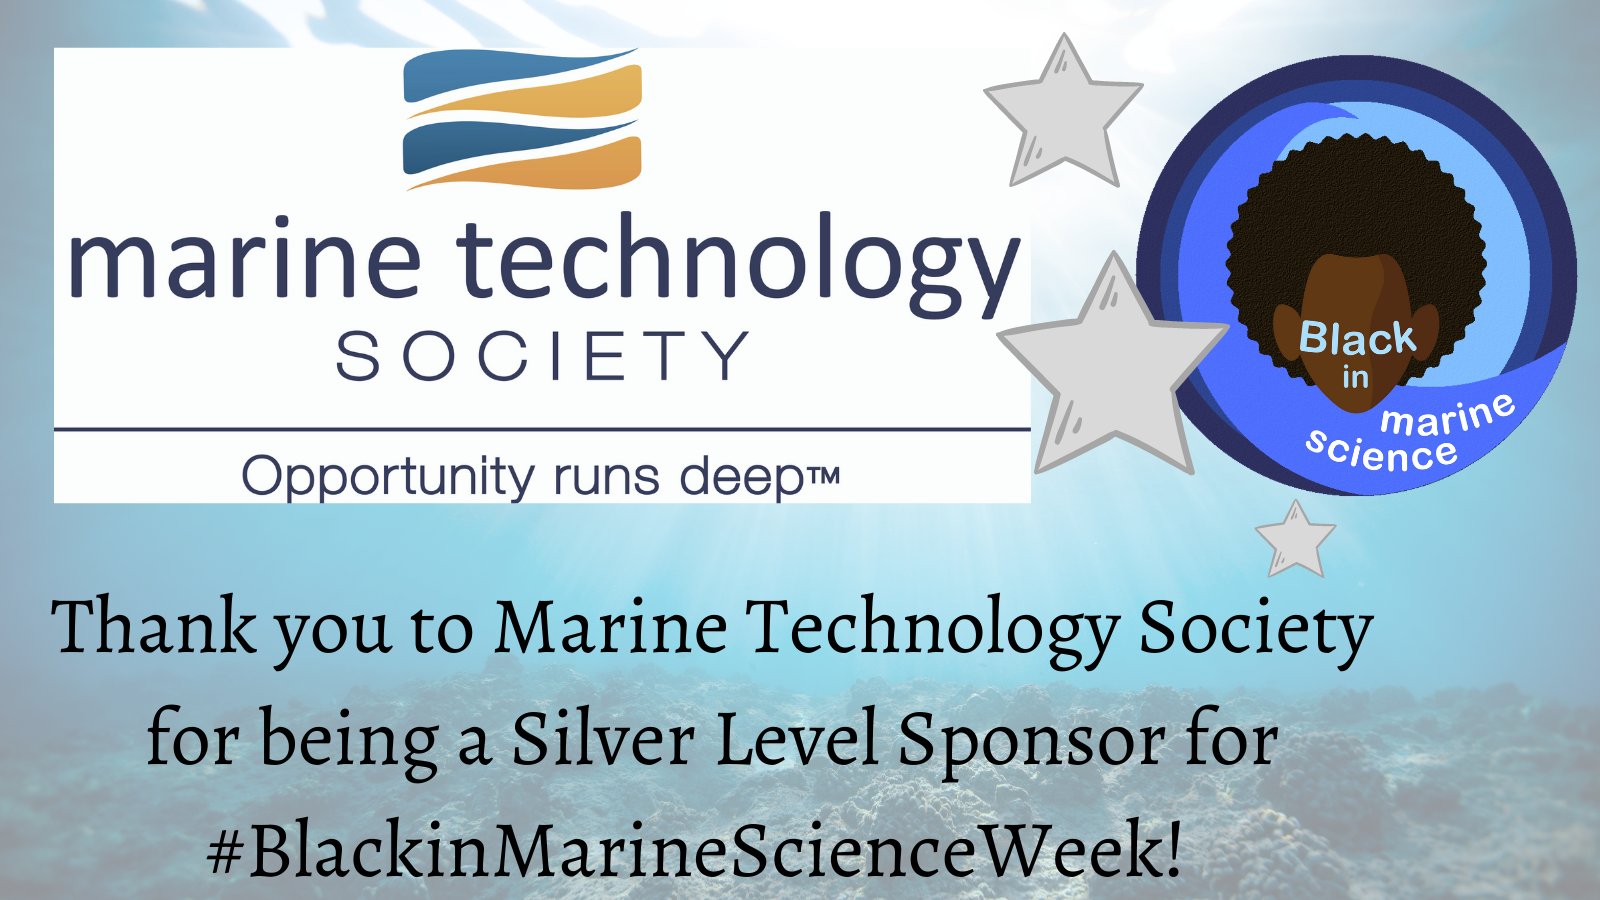 Thank you to the Marine Technology Society for being a Silver-Level Sponsor for Black in Marine Science Week